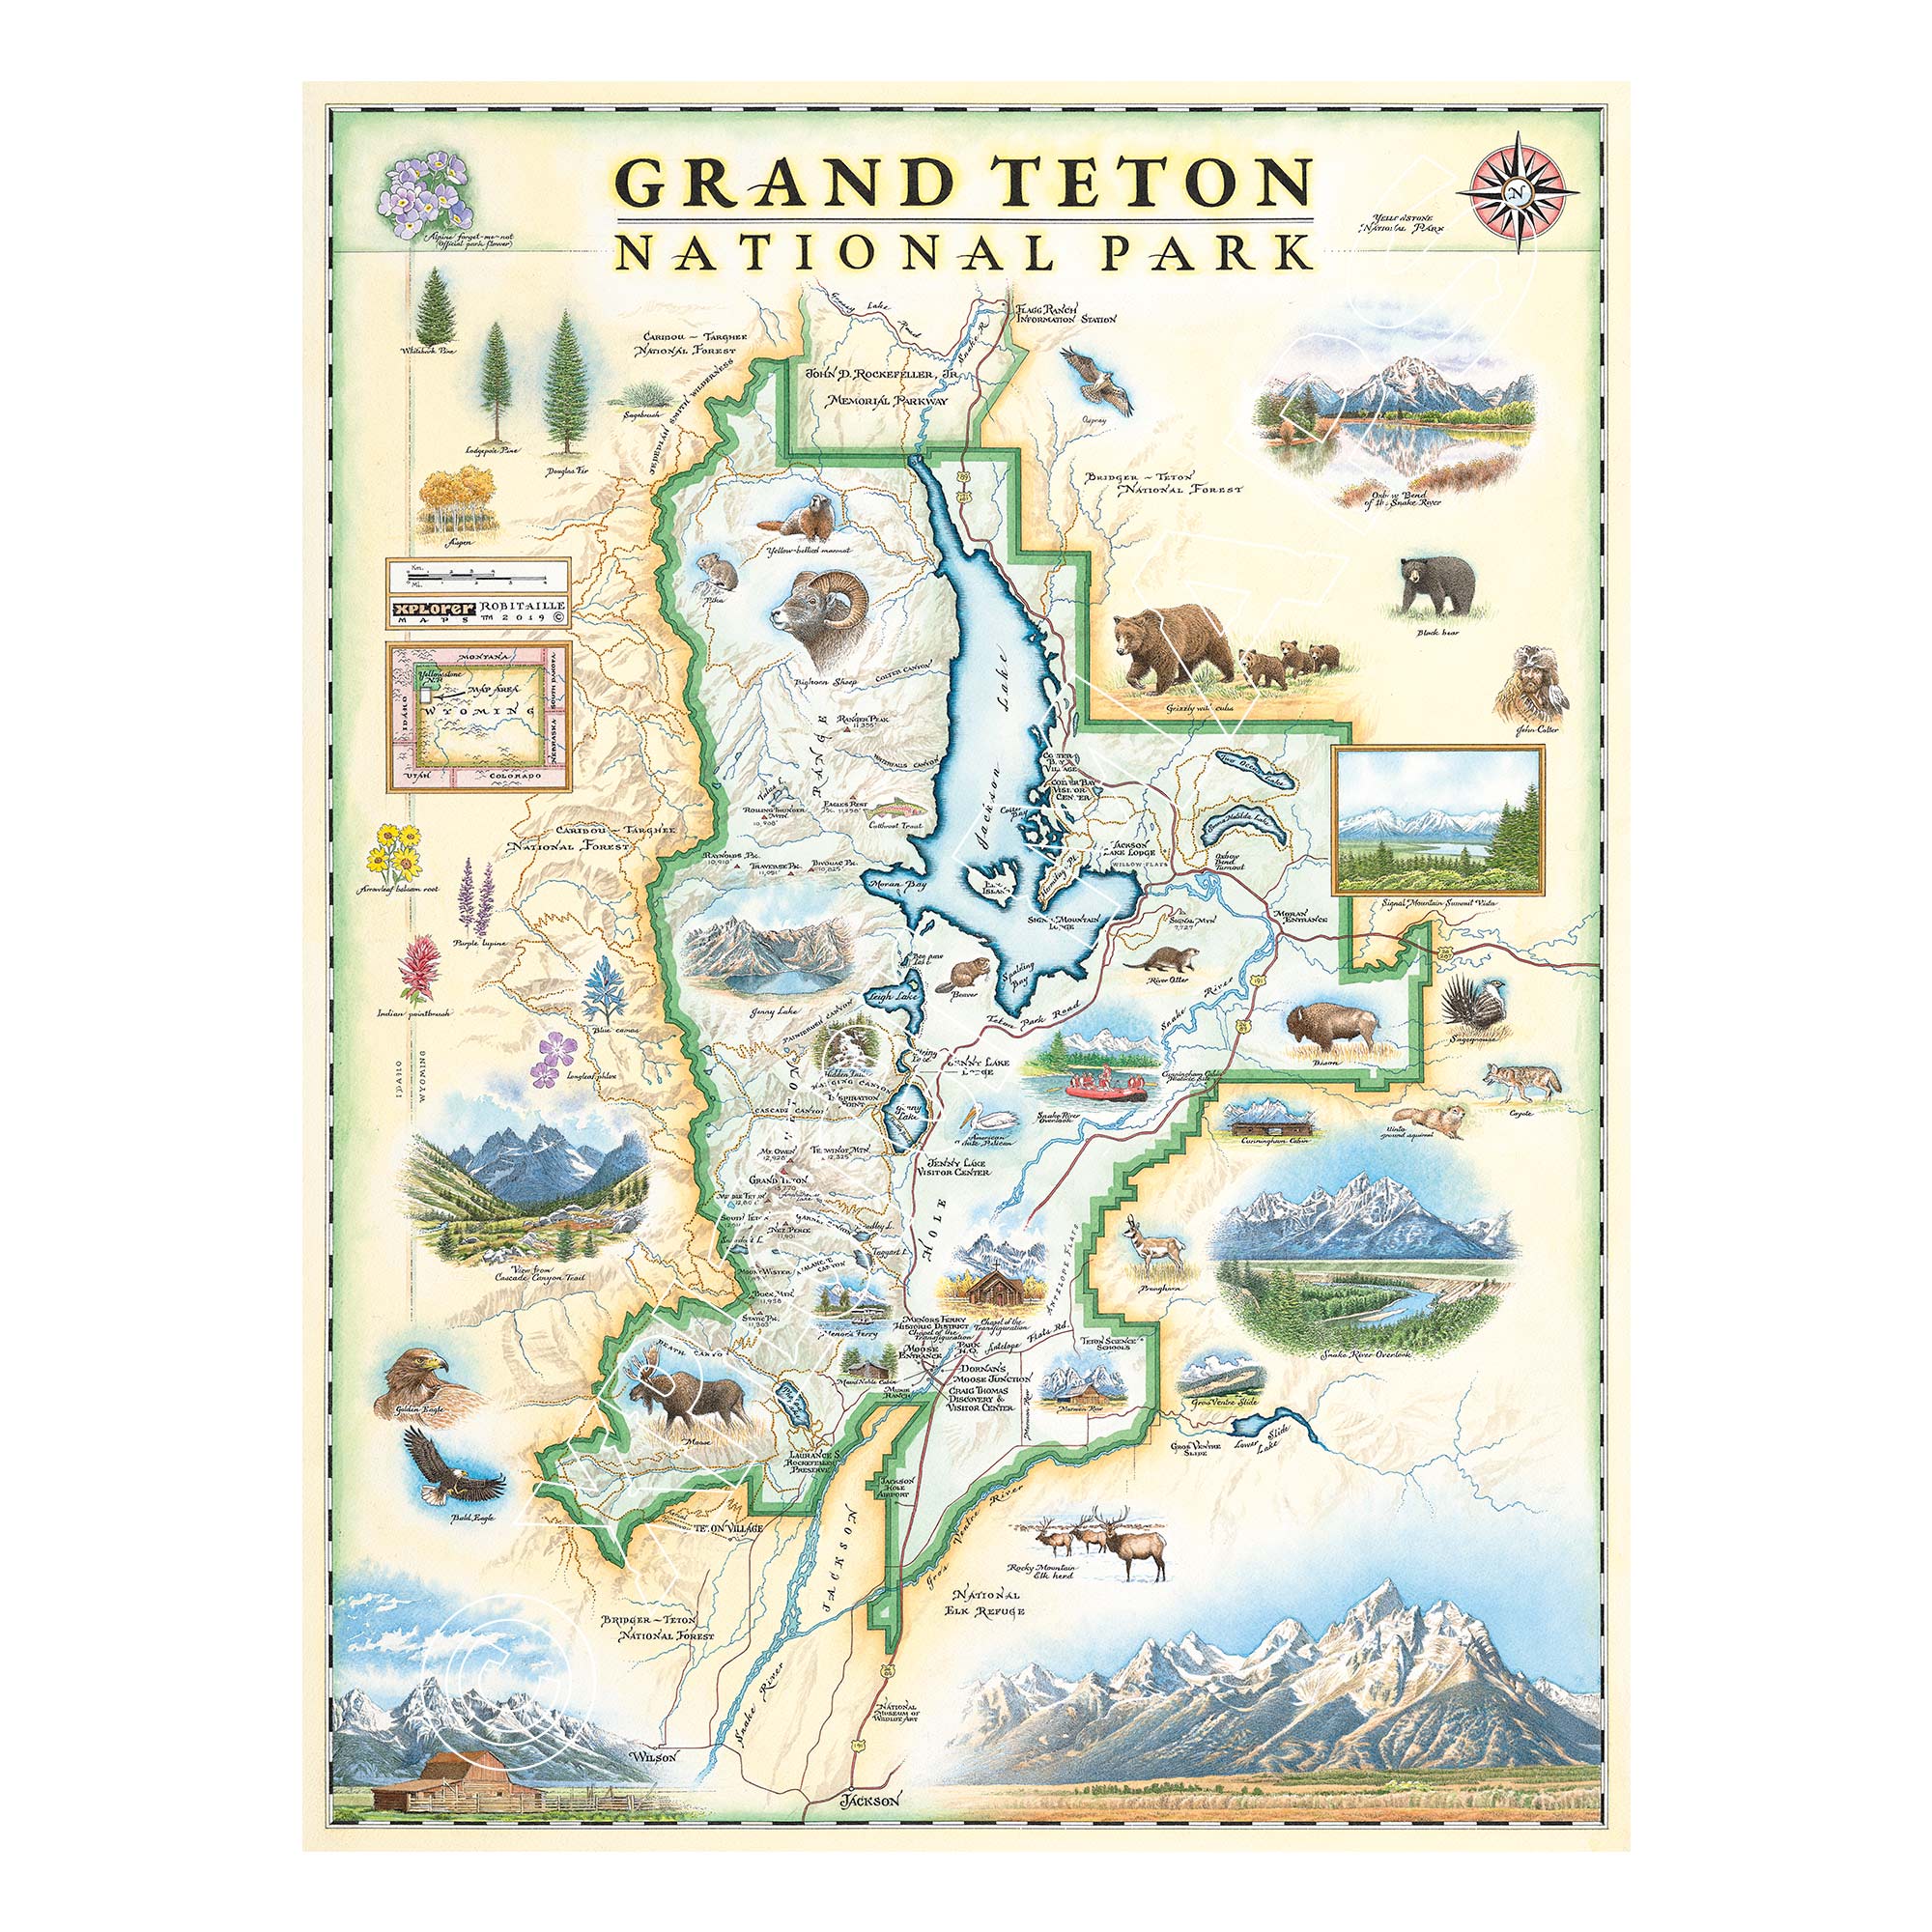 Grand Teton National Park hand-drawn map in earth tone colors of beige and blue. The map includes flora and fauna of the area, such as grizzly bear, moose, coyote, lupine, and longleaf phlox. Illustrations of places include snake river overlook, jenny lake, and Colter Bay village. Measures 18x24.